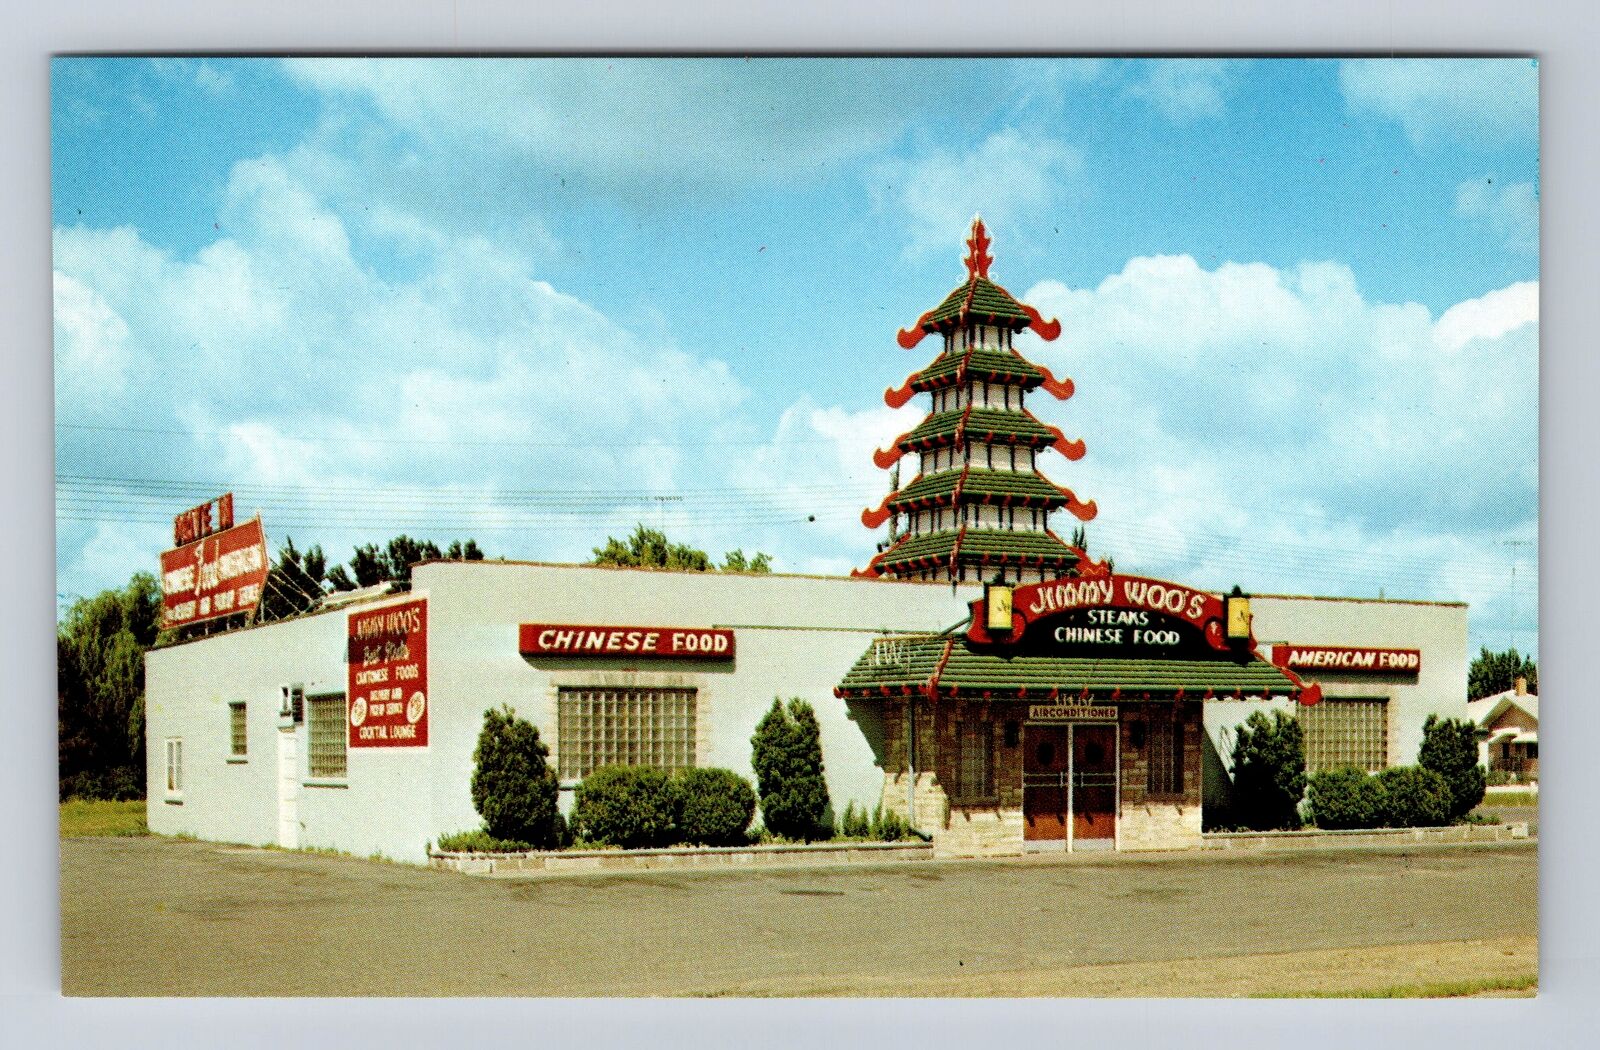 Eau Claire WI-Wisconsin, Jimmy Woo's Restaurant Advertising, Vintage Postcard